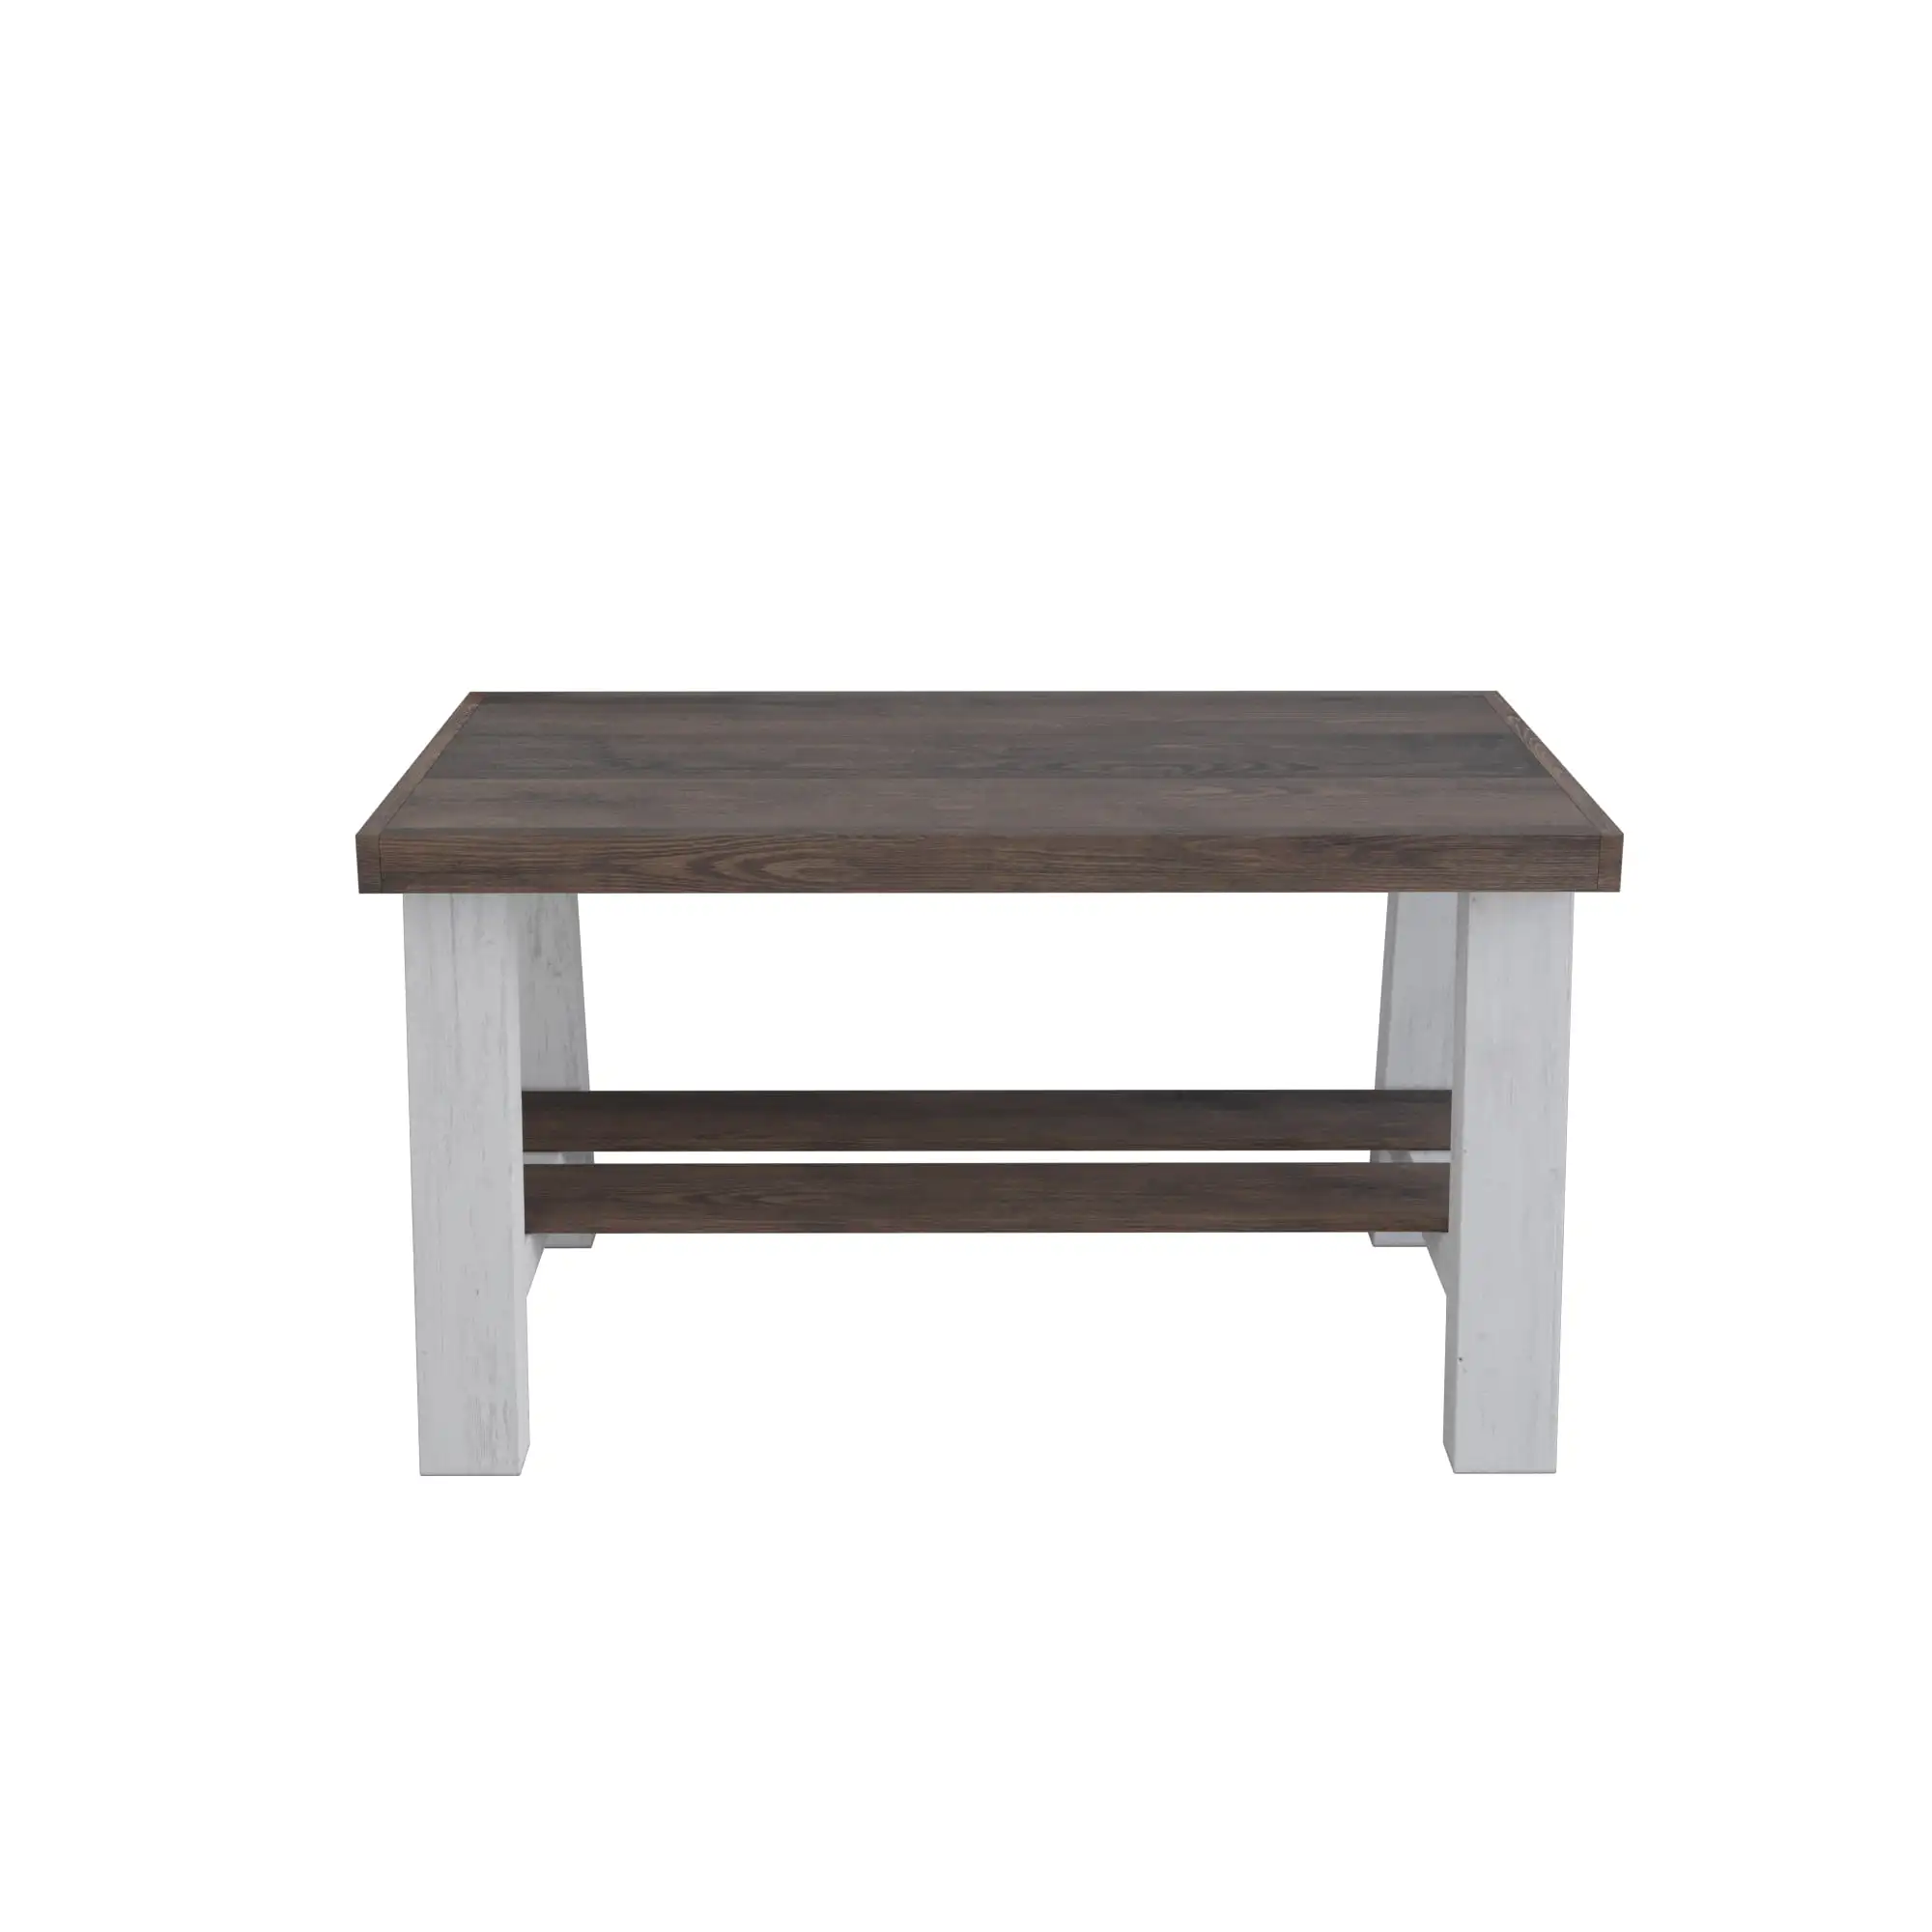 

Woven Paths Pine Wood Entryway Bench with Shelf, Dark Brown and White